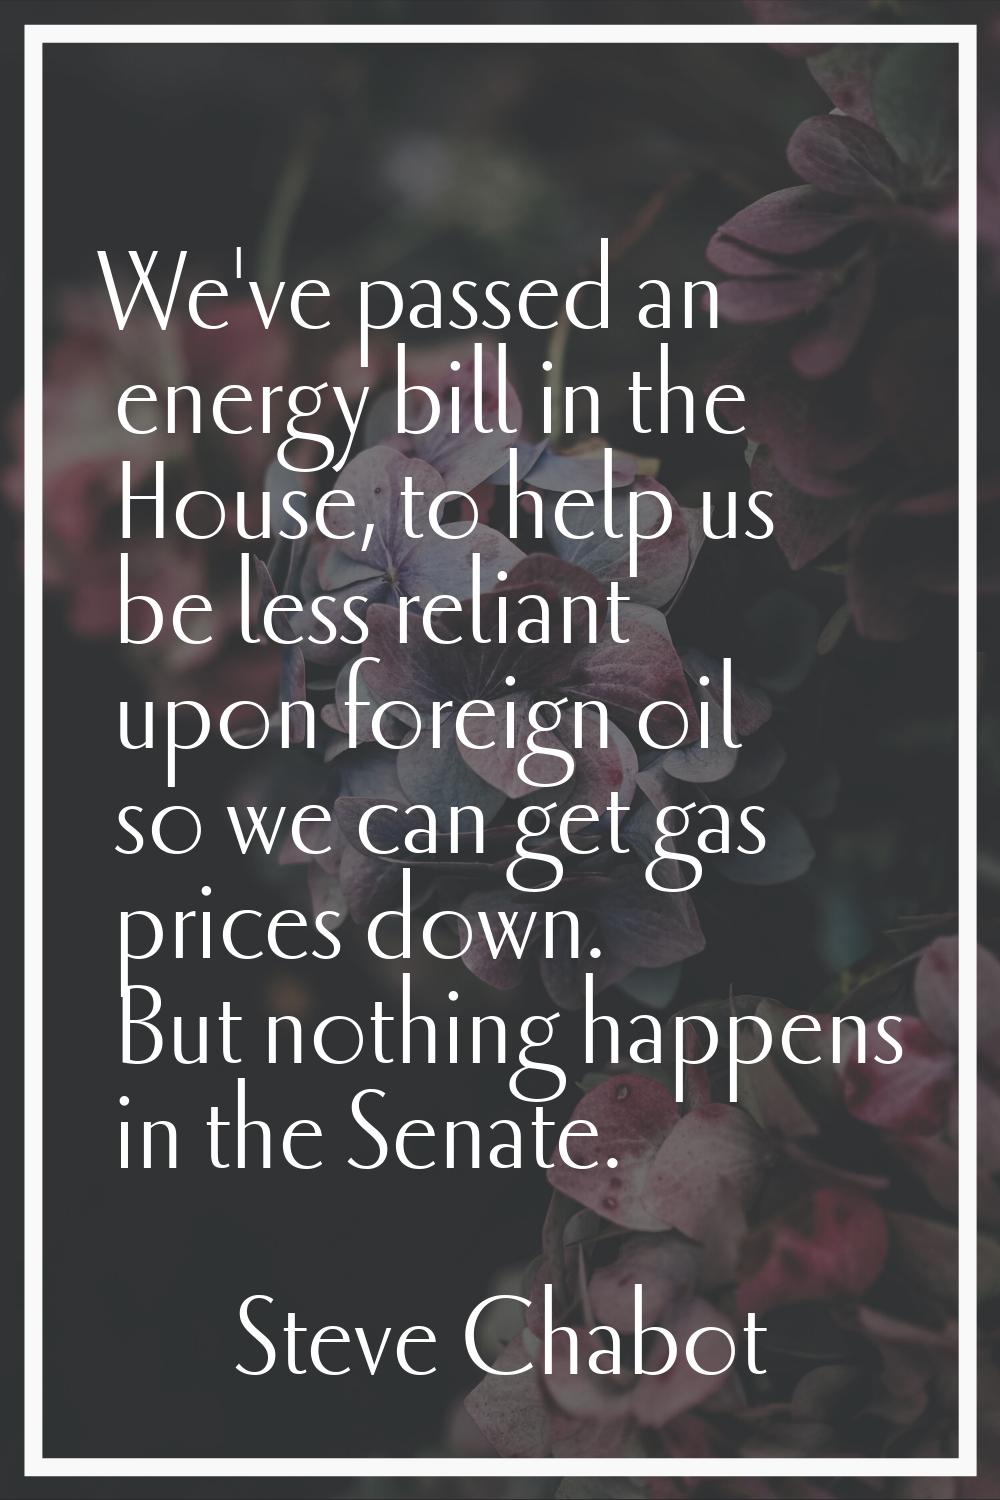 We've passed an energy bill in the House, to help us be less reliant upon foreign oil so we can get